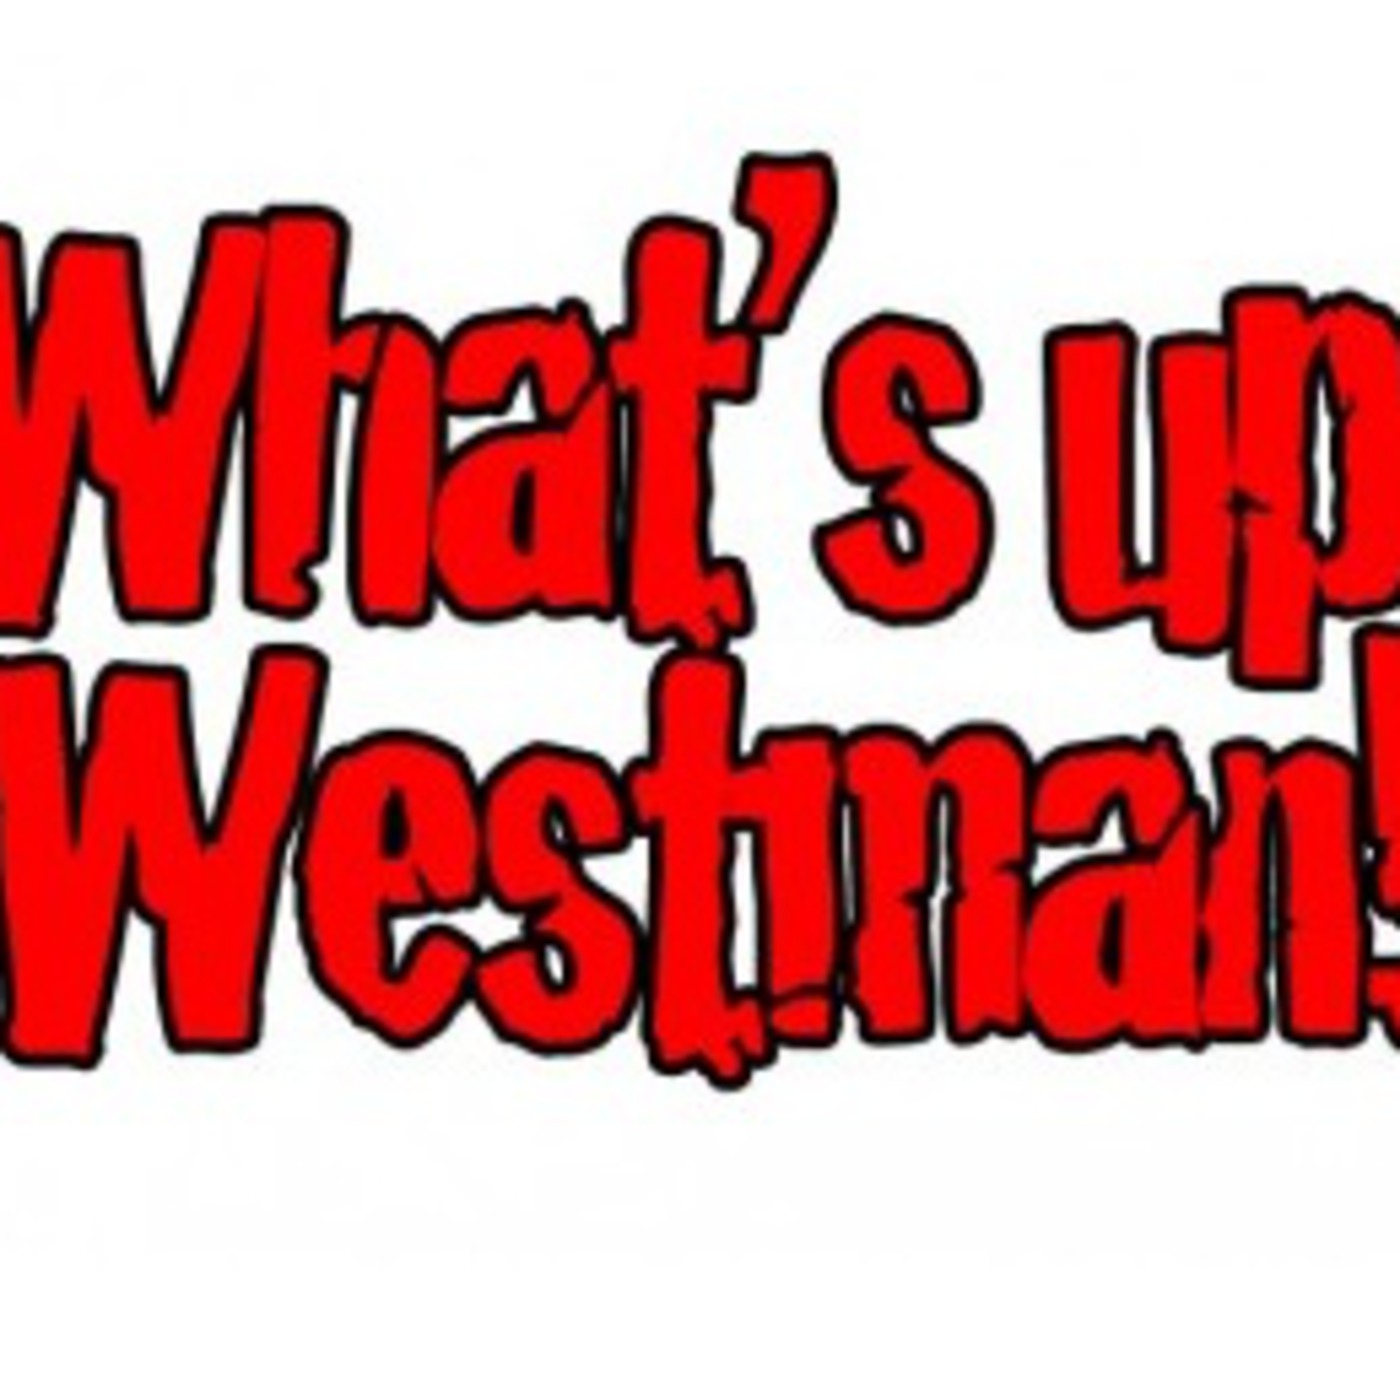 What's Up Westman talks "Madagascar 3"